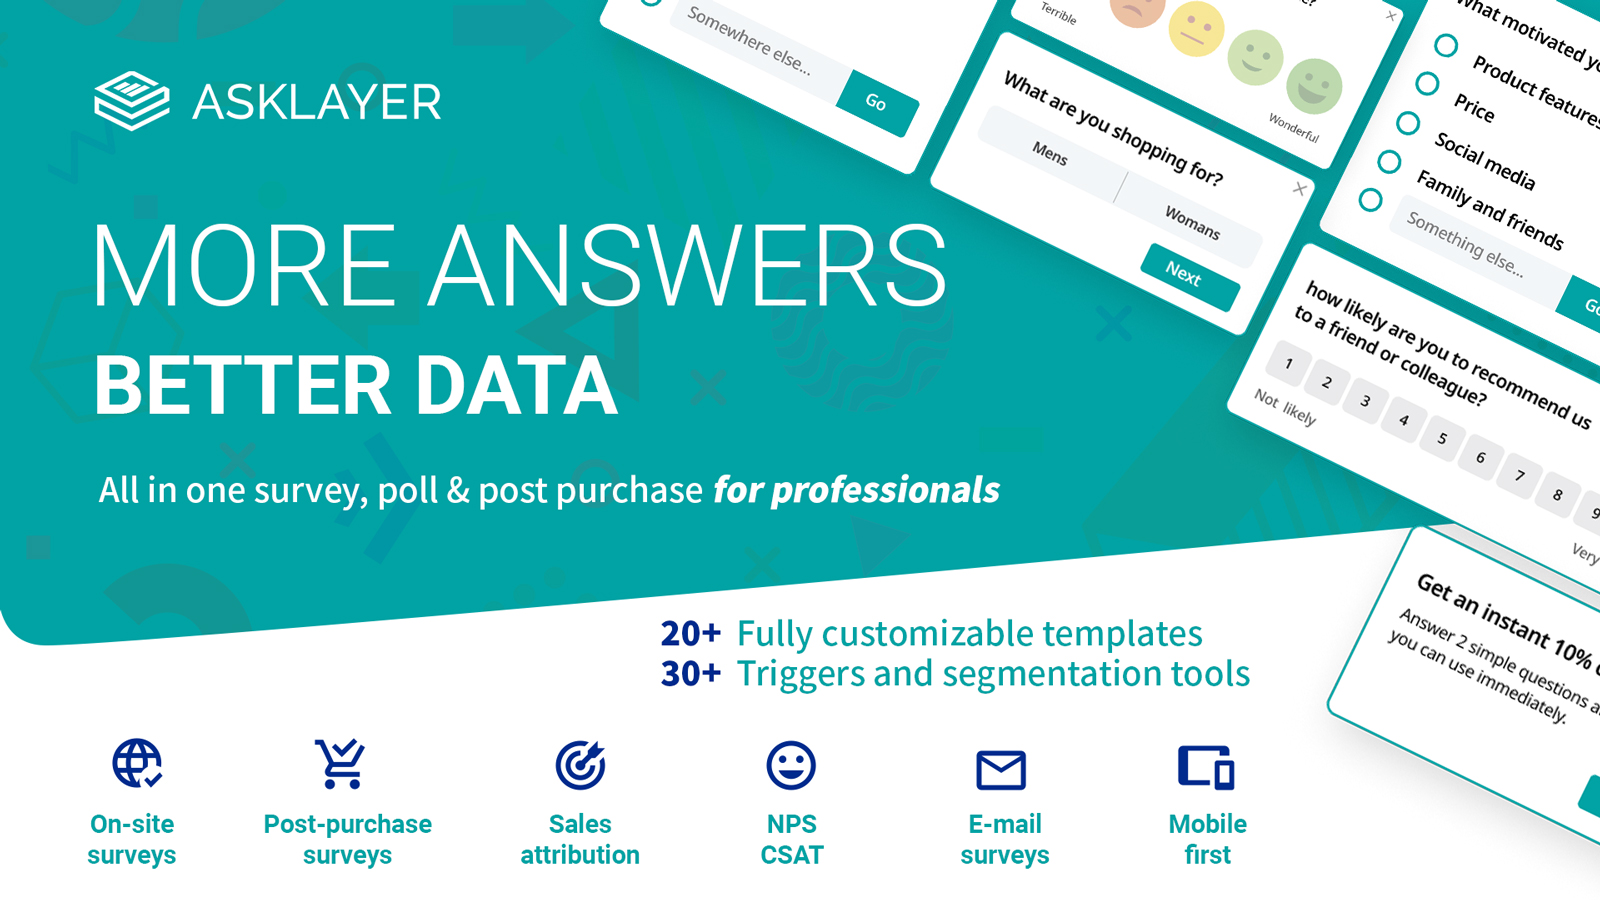 Asklayer Get more answers and better data